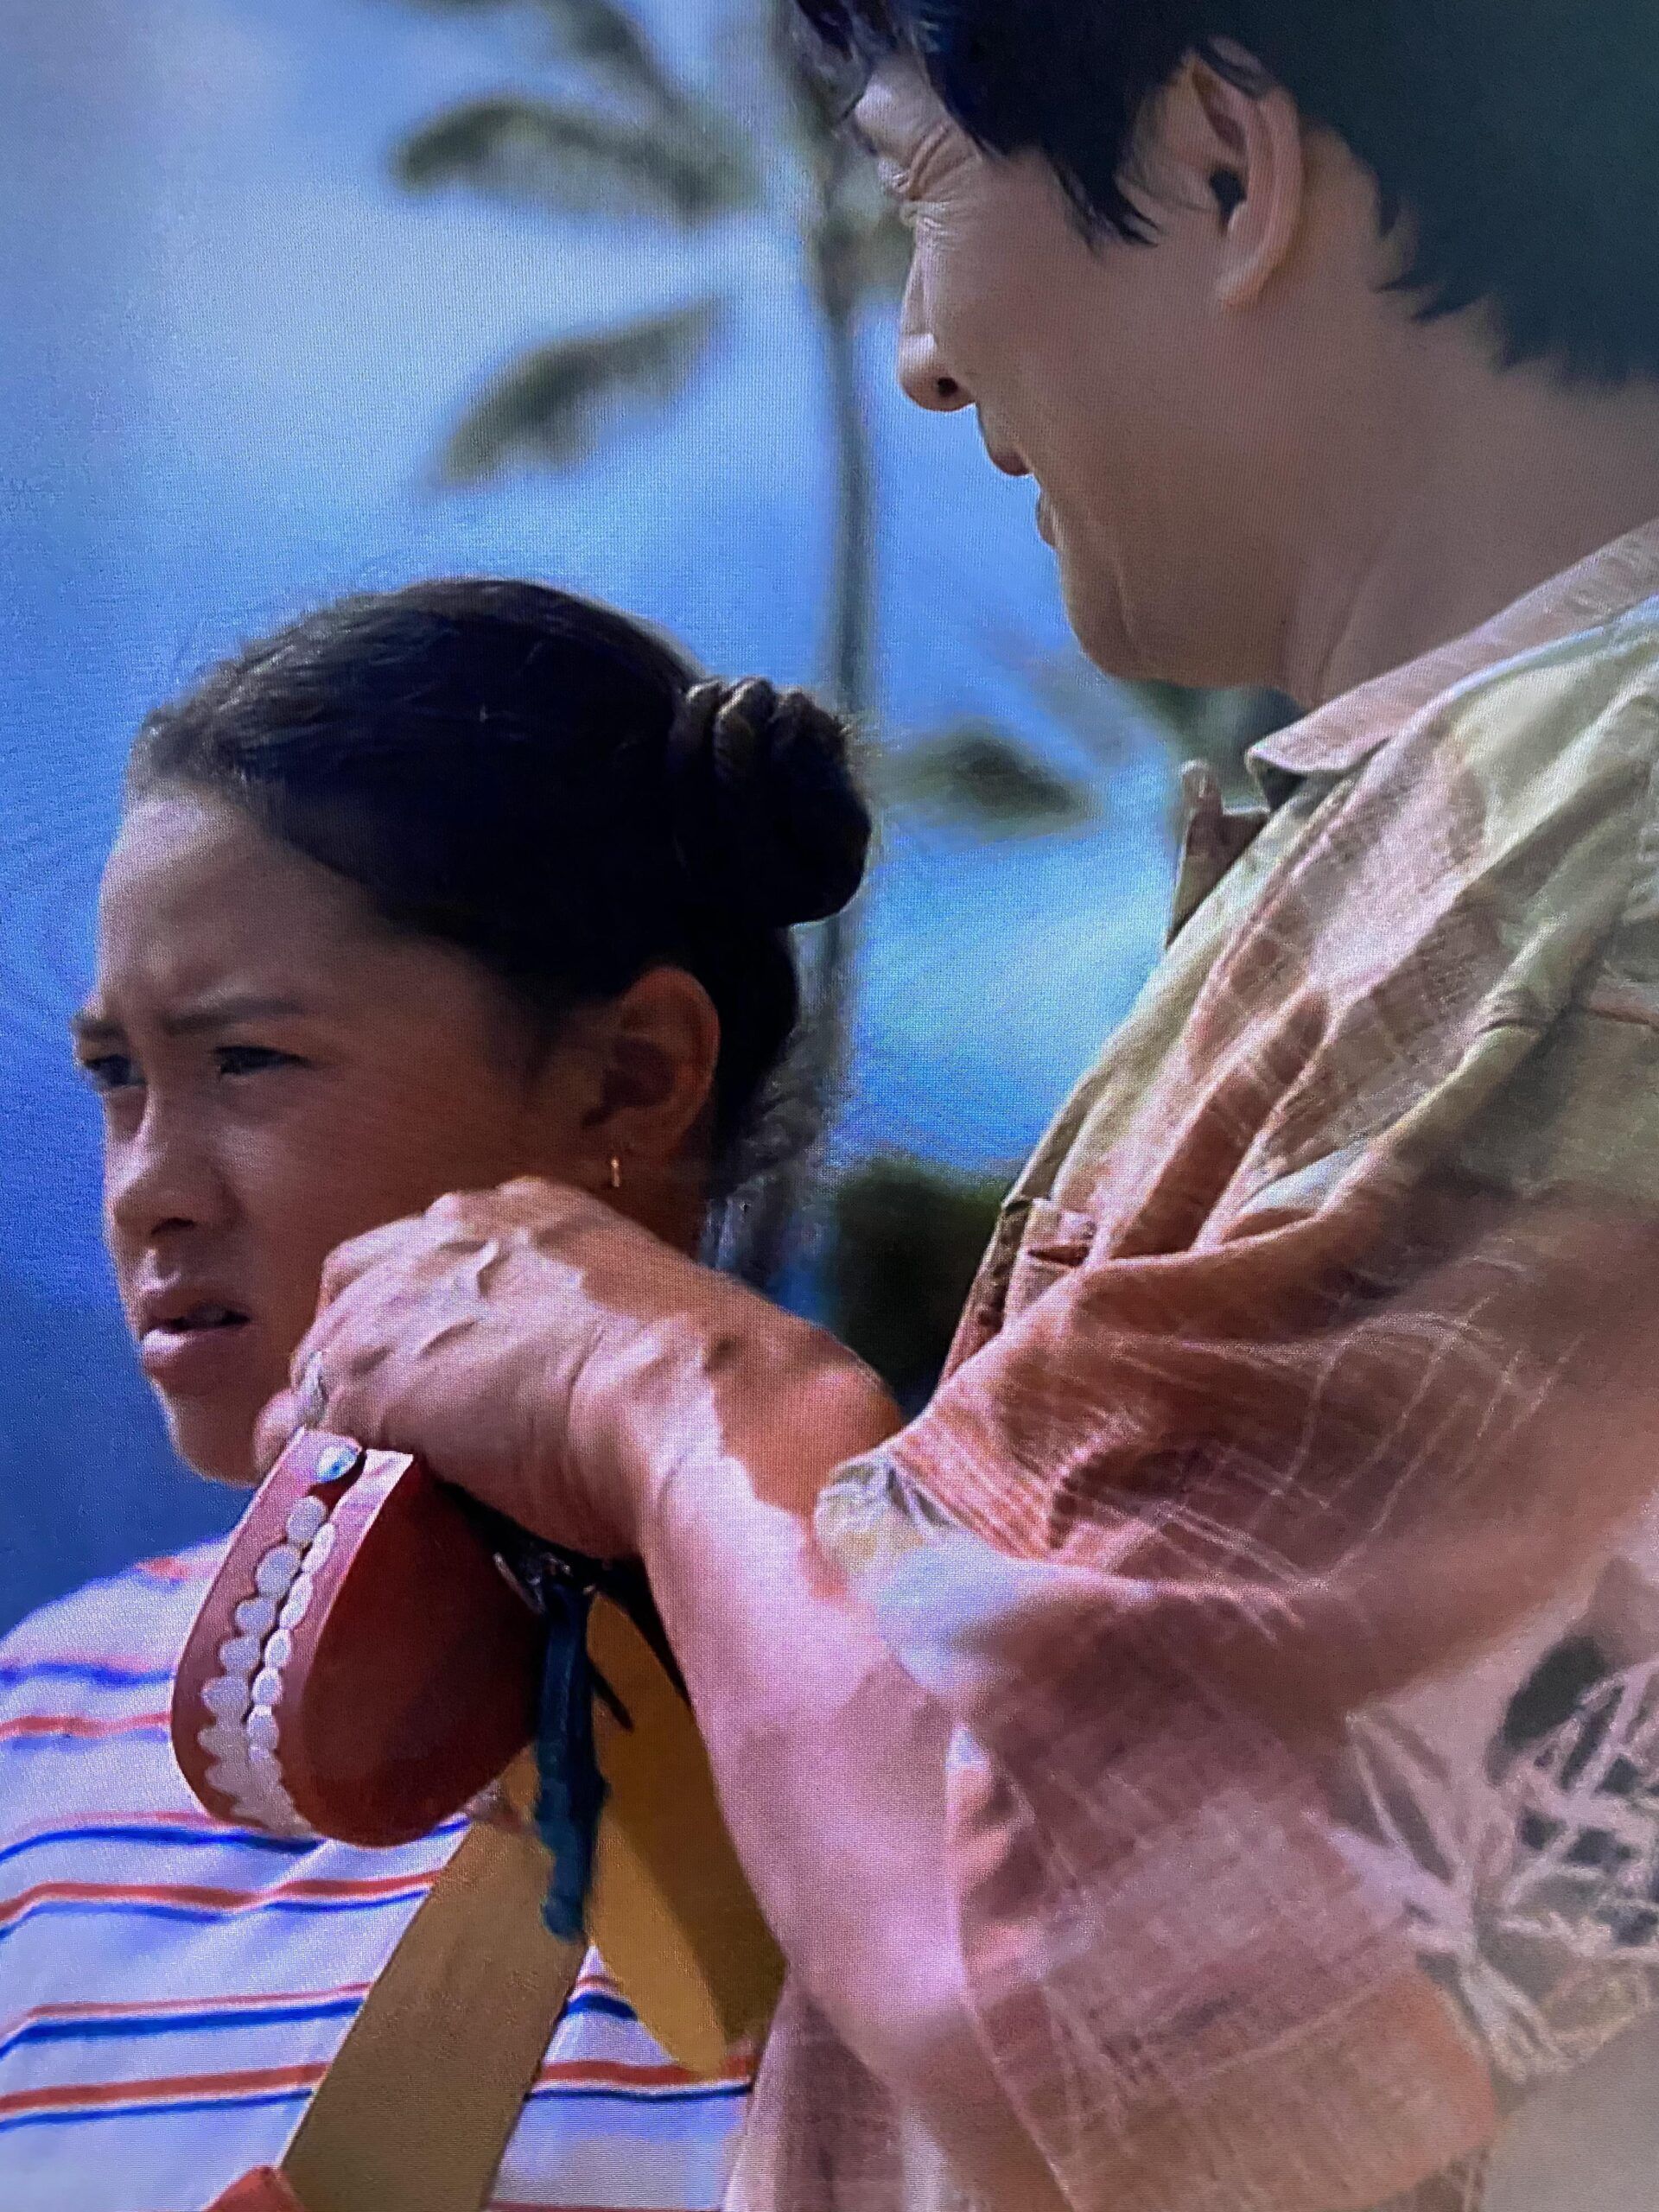 In Finding 'Ohana (2021), Ke Huy Quan, who plays Data in The Goonies (1985), has a keychain of his Pinchers of Power! (Pinchers of Peril haha)